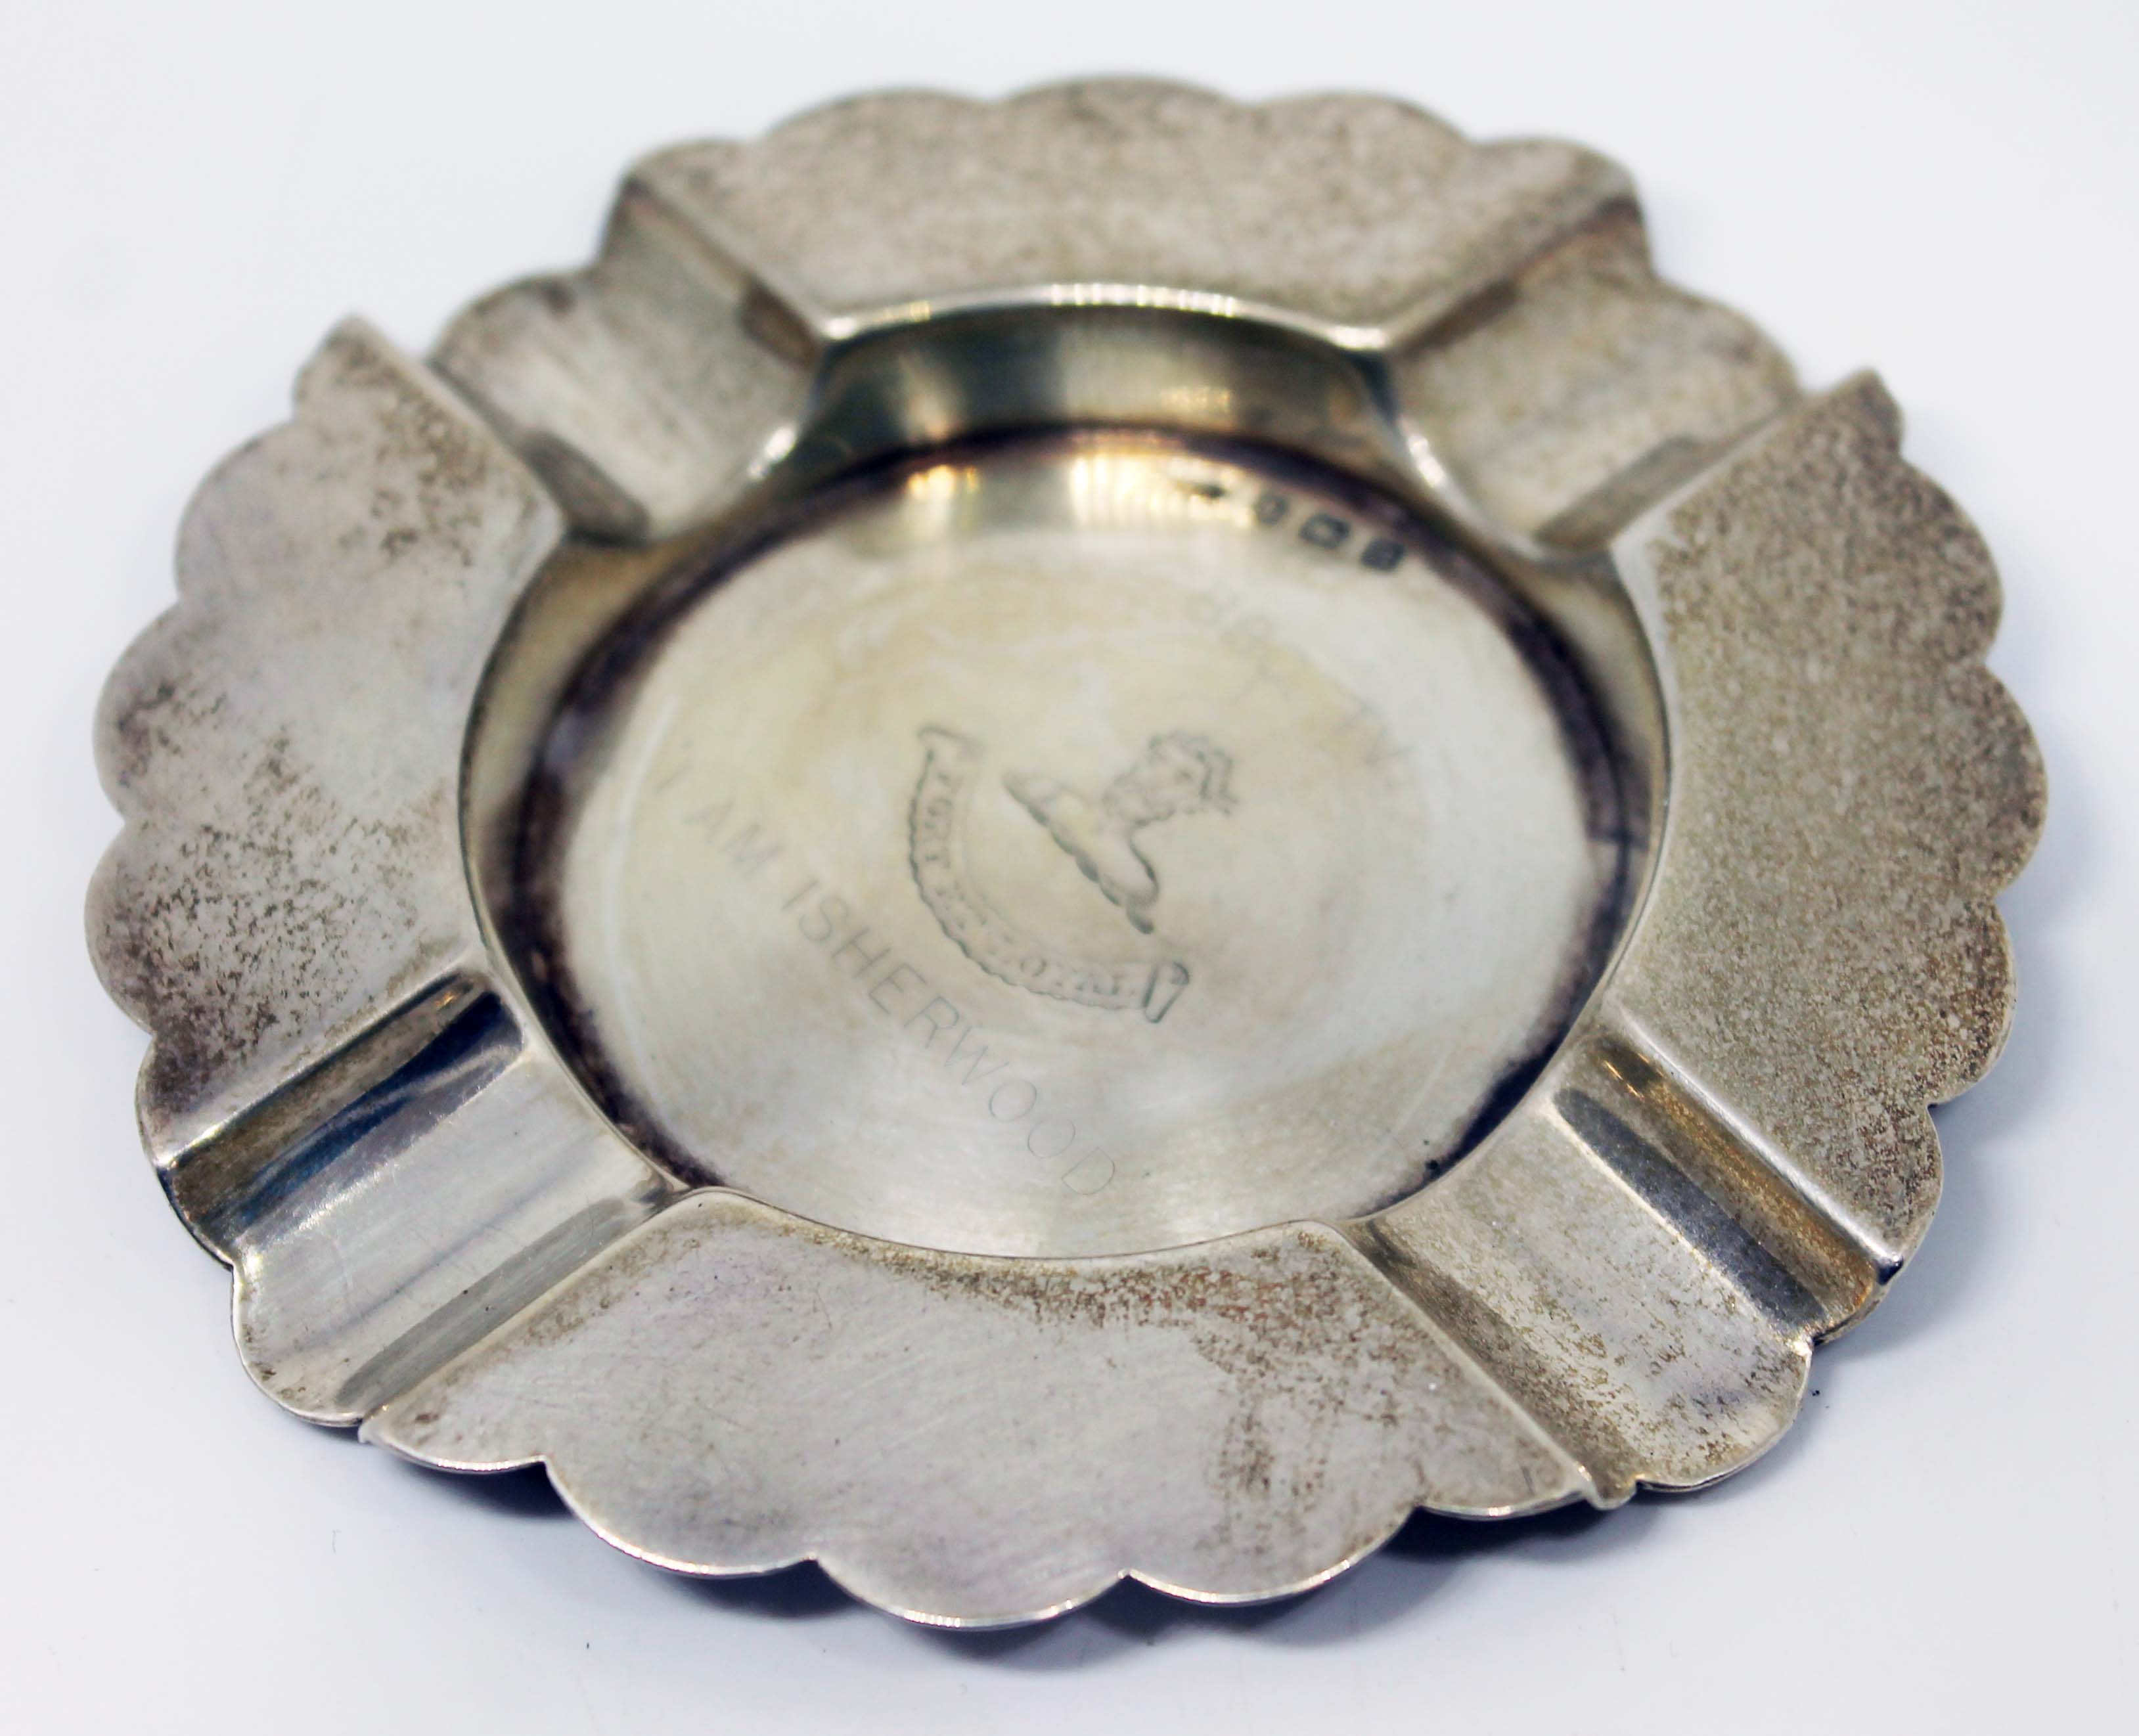 A hallmarked silver ash tray presented to James Lawrence Isherwood from BBC, inscribed 'BBC TV I